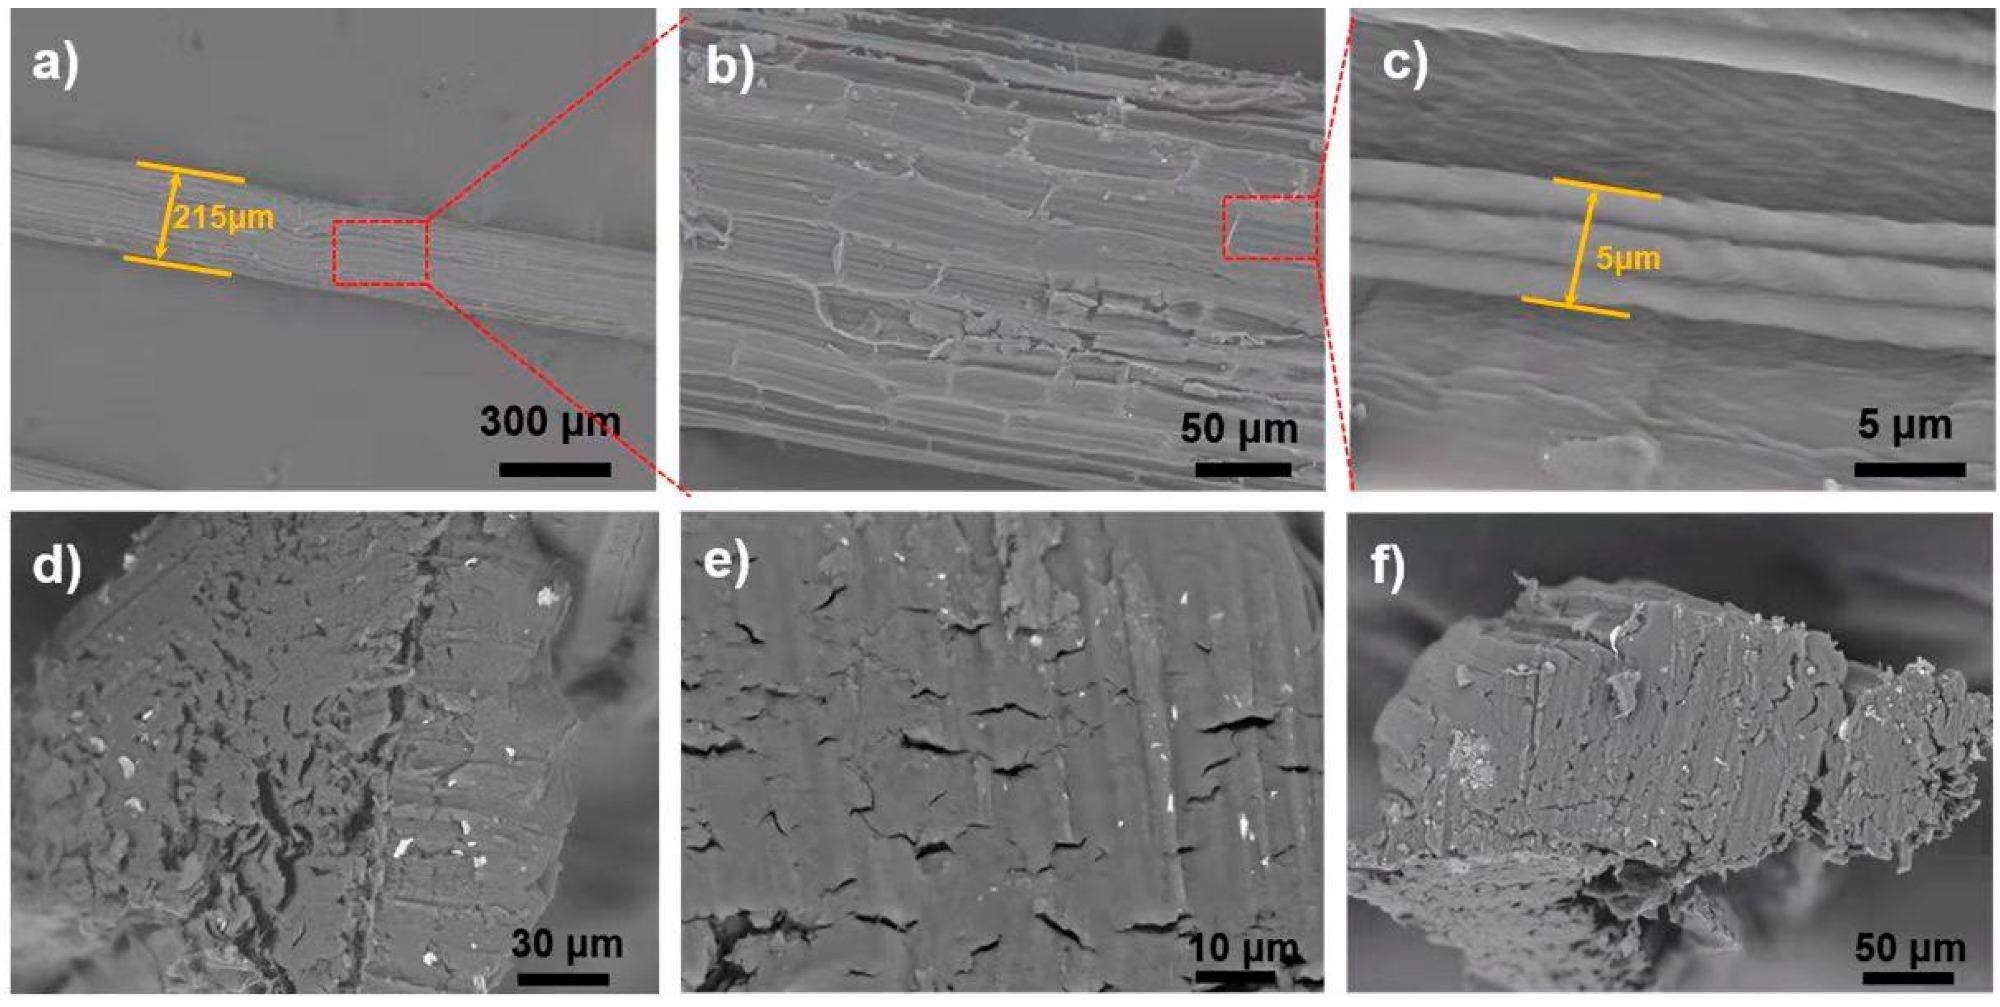 Scanning electron micrograph of different segments of raw sisal fiber: (a) Cross-sectional view of raw sisal fiber and visual demonstration of numerous microfibrils intertwined with each other. (b) SEM image of the red rectangular area selected in panel (a). (c) Magnified SEM view of the marked red rectangular area from panel (b). (d–f) Cross-sections of a raw sample with different magnifications.